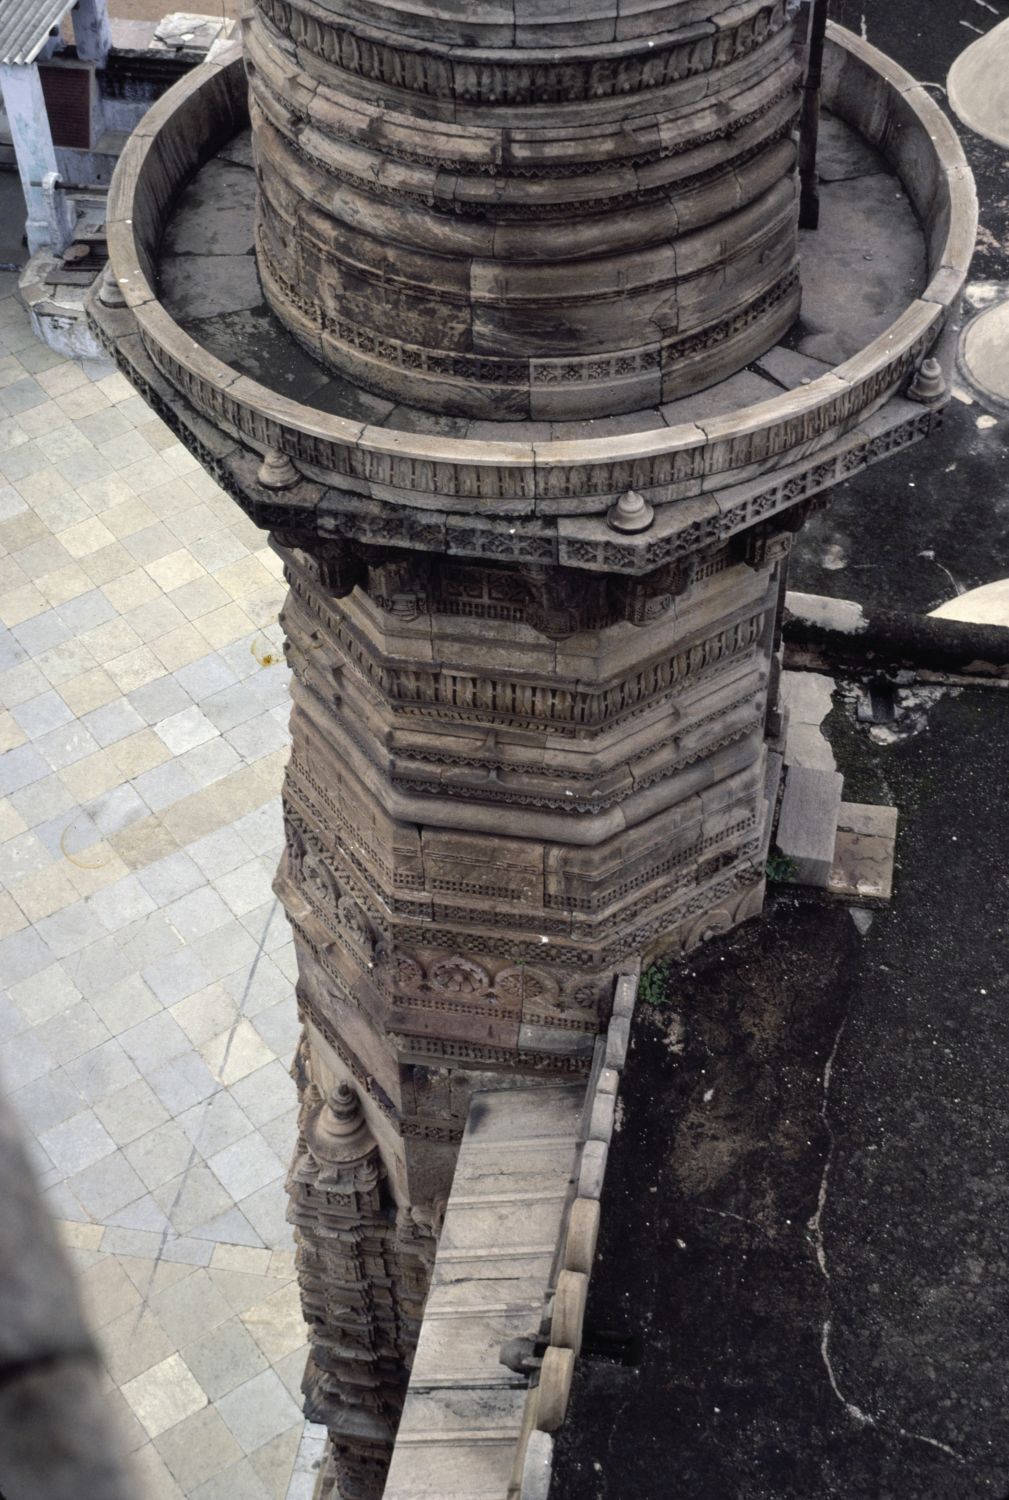 View of lower portion of a minaret from the roof.